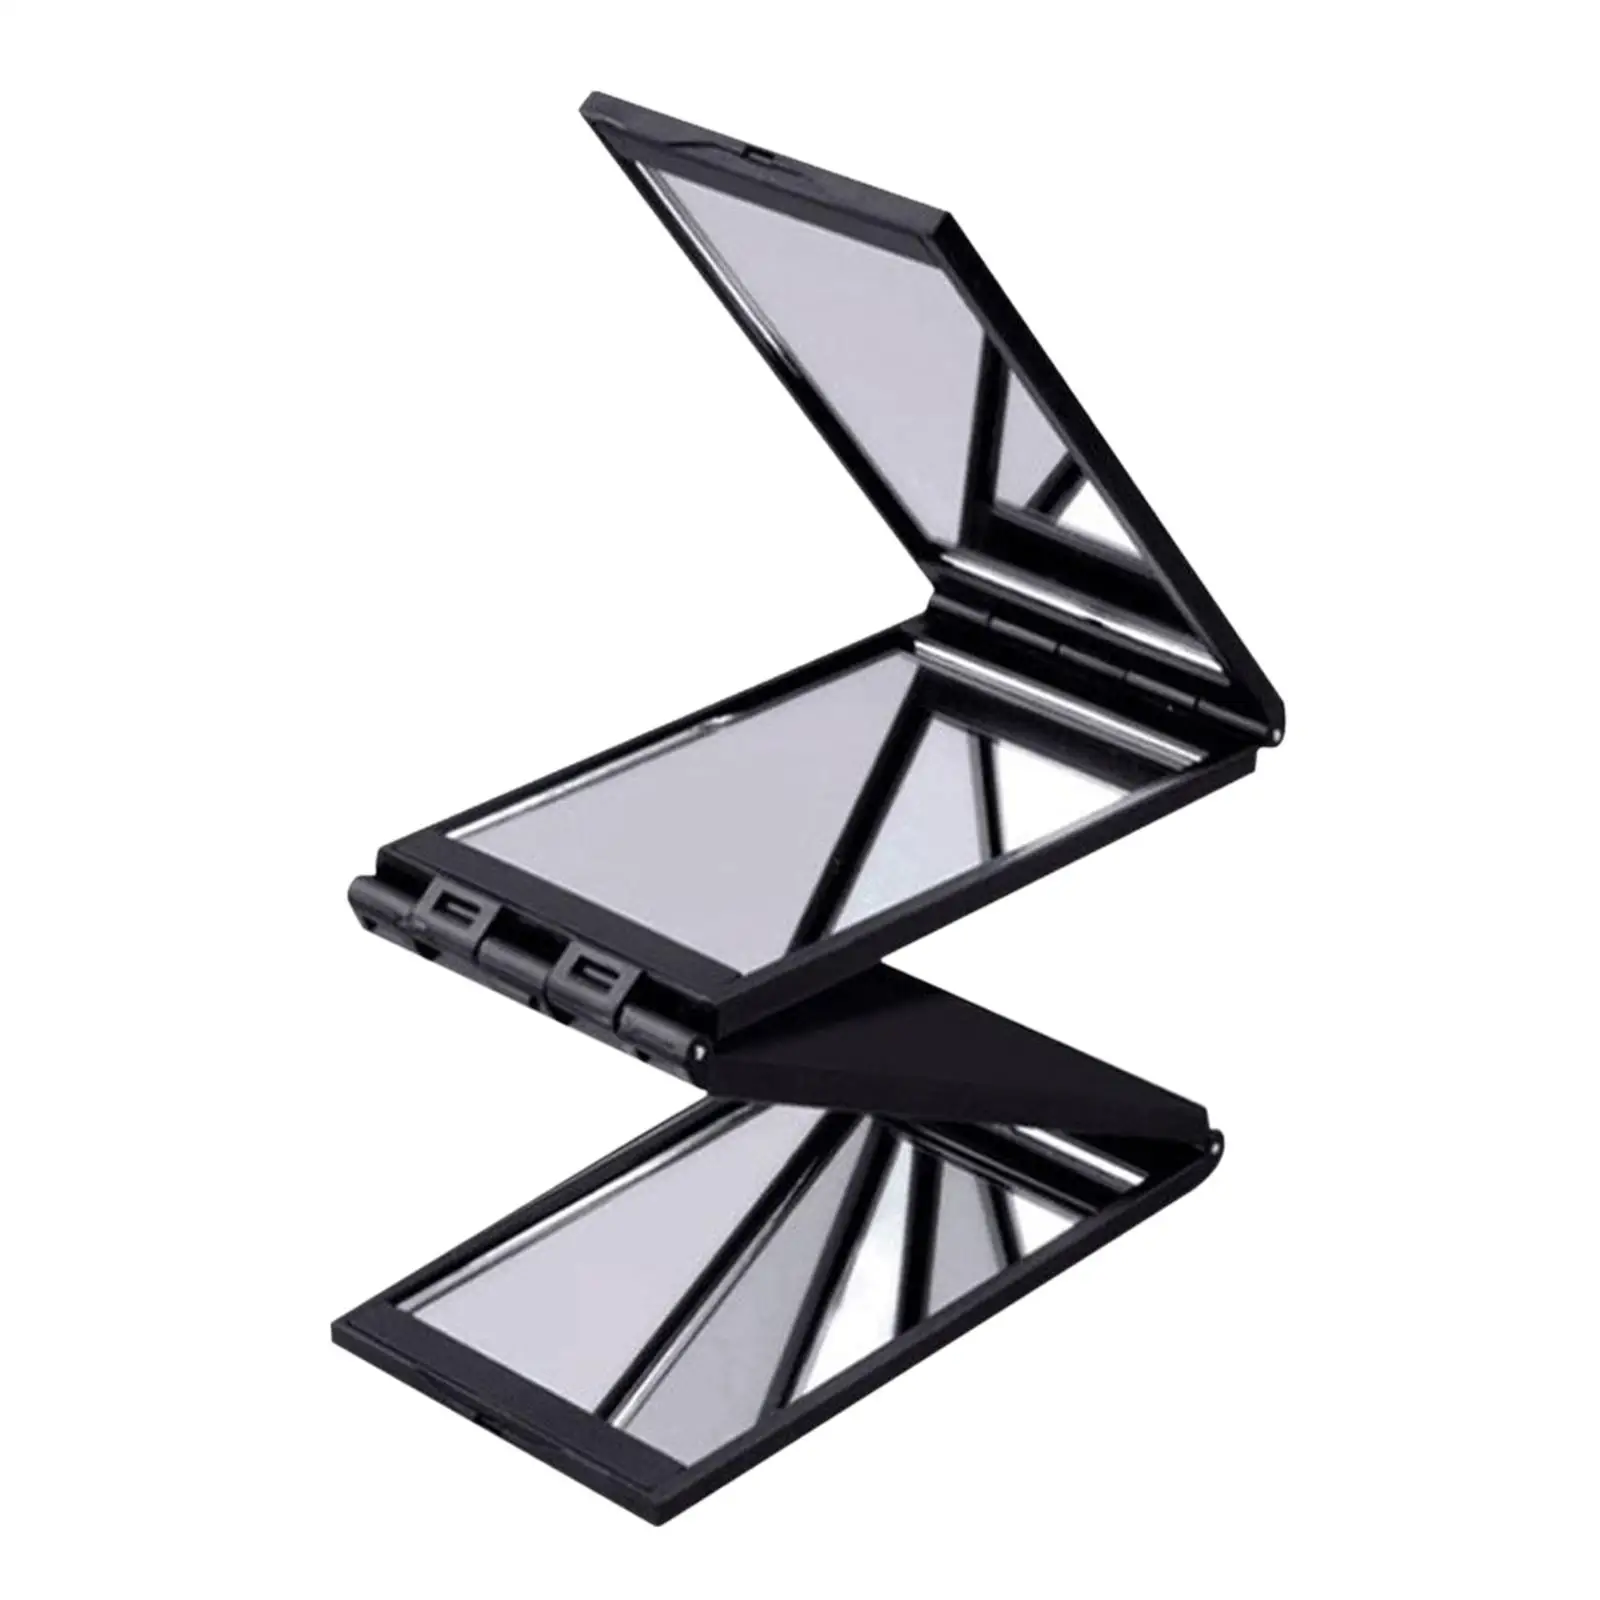 4 Sided Foldable Makeup Mirror Small Girl Compact Mirror Clear Travel Cosmetic Vanity Mirror for Bathroom Home Countertop SPA